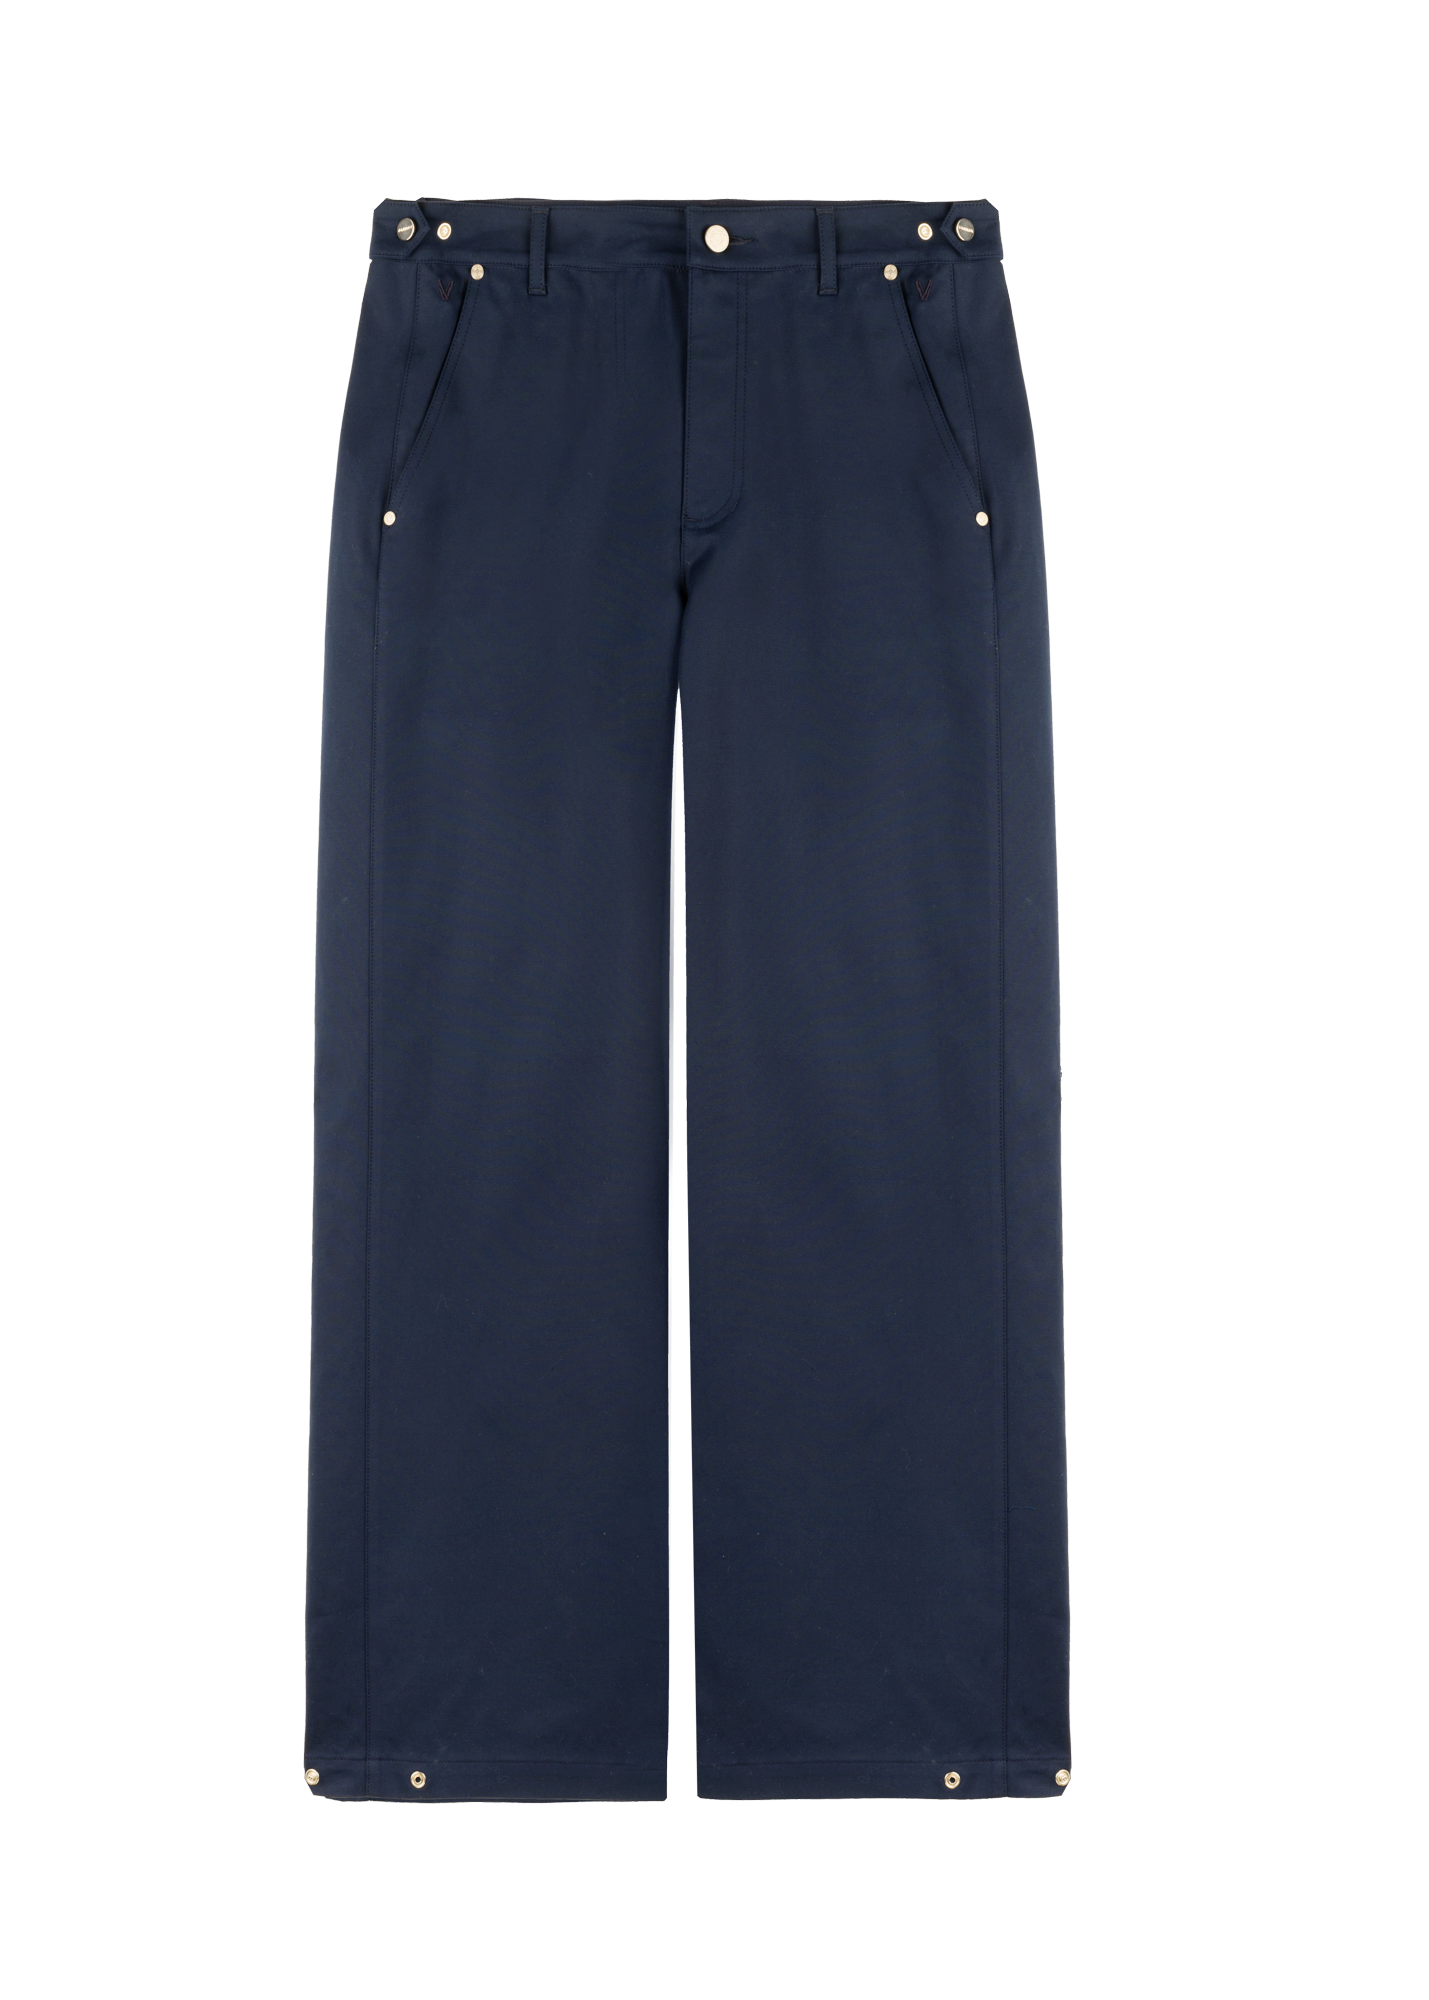 Adjustable cotton trousers